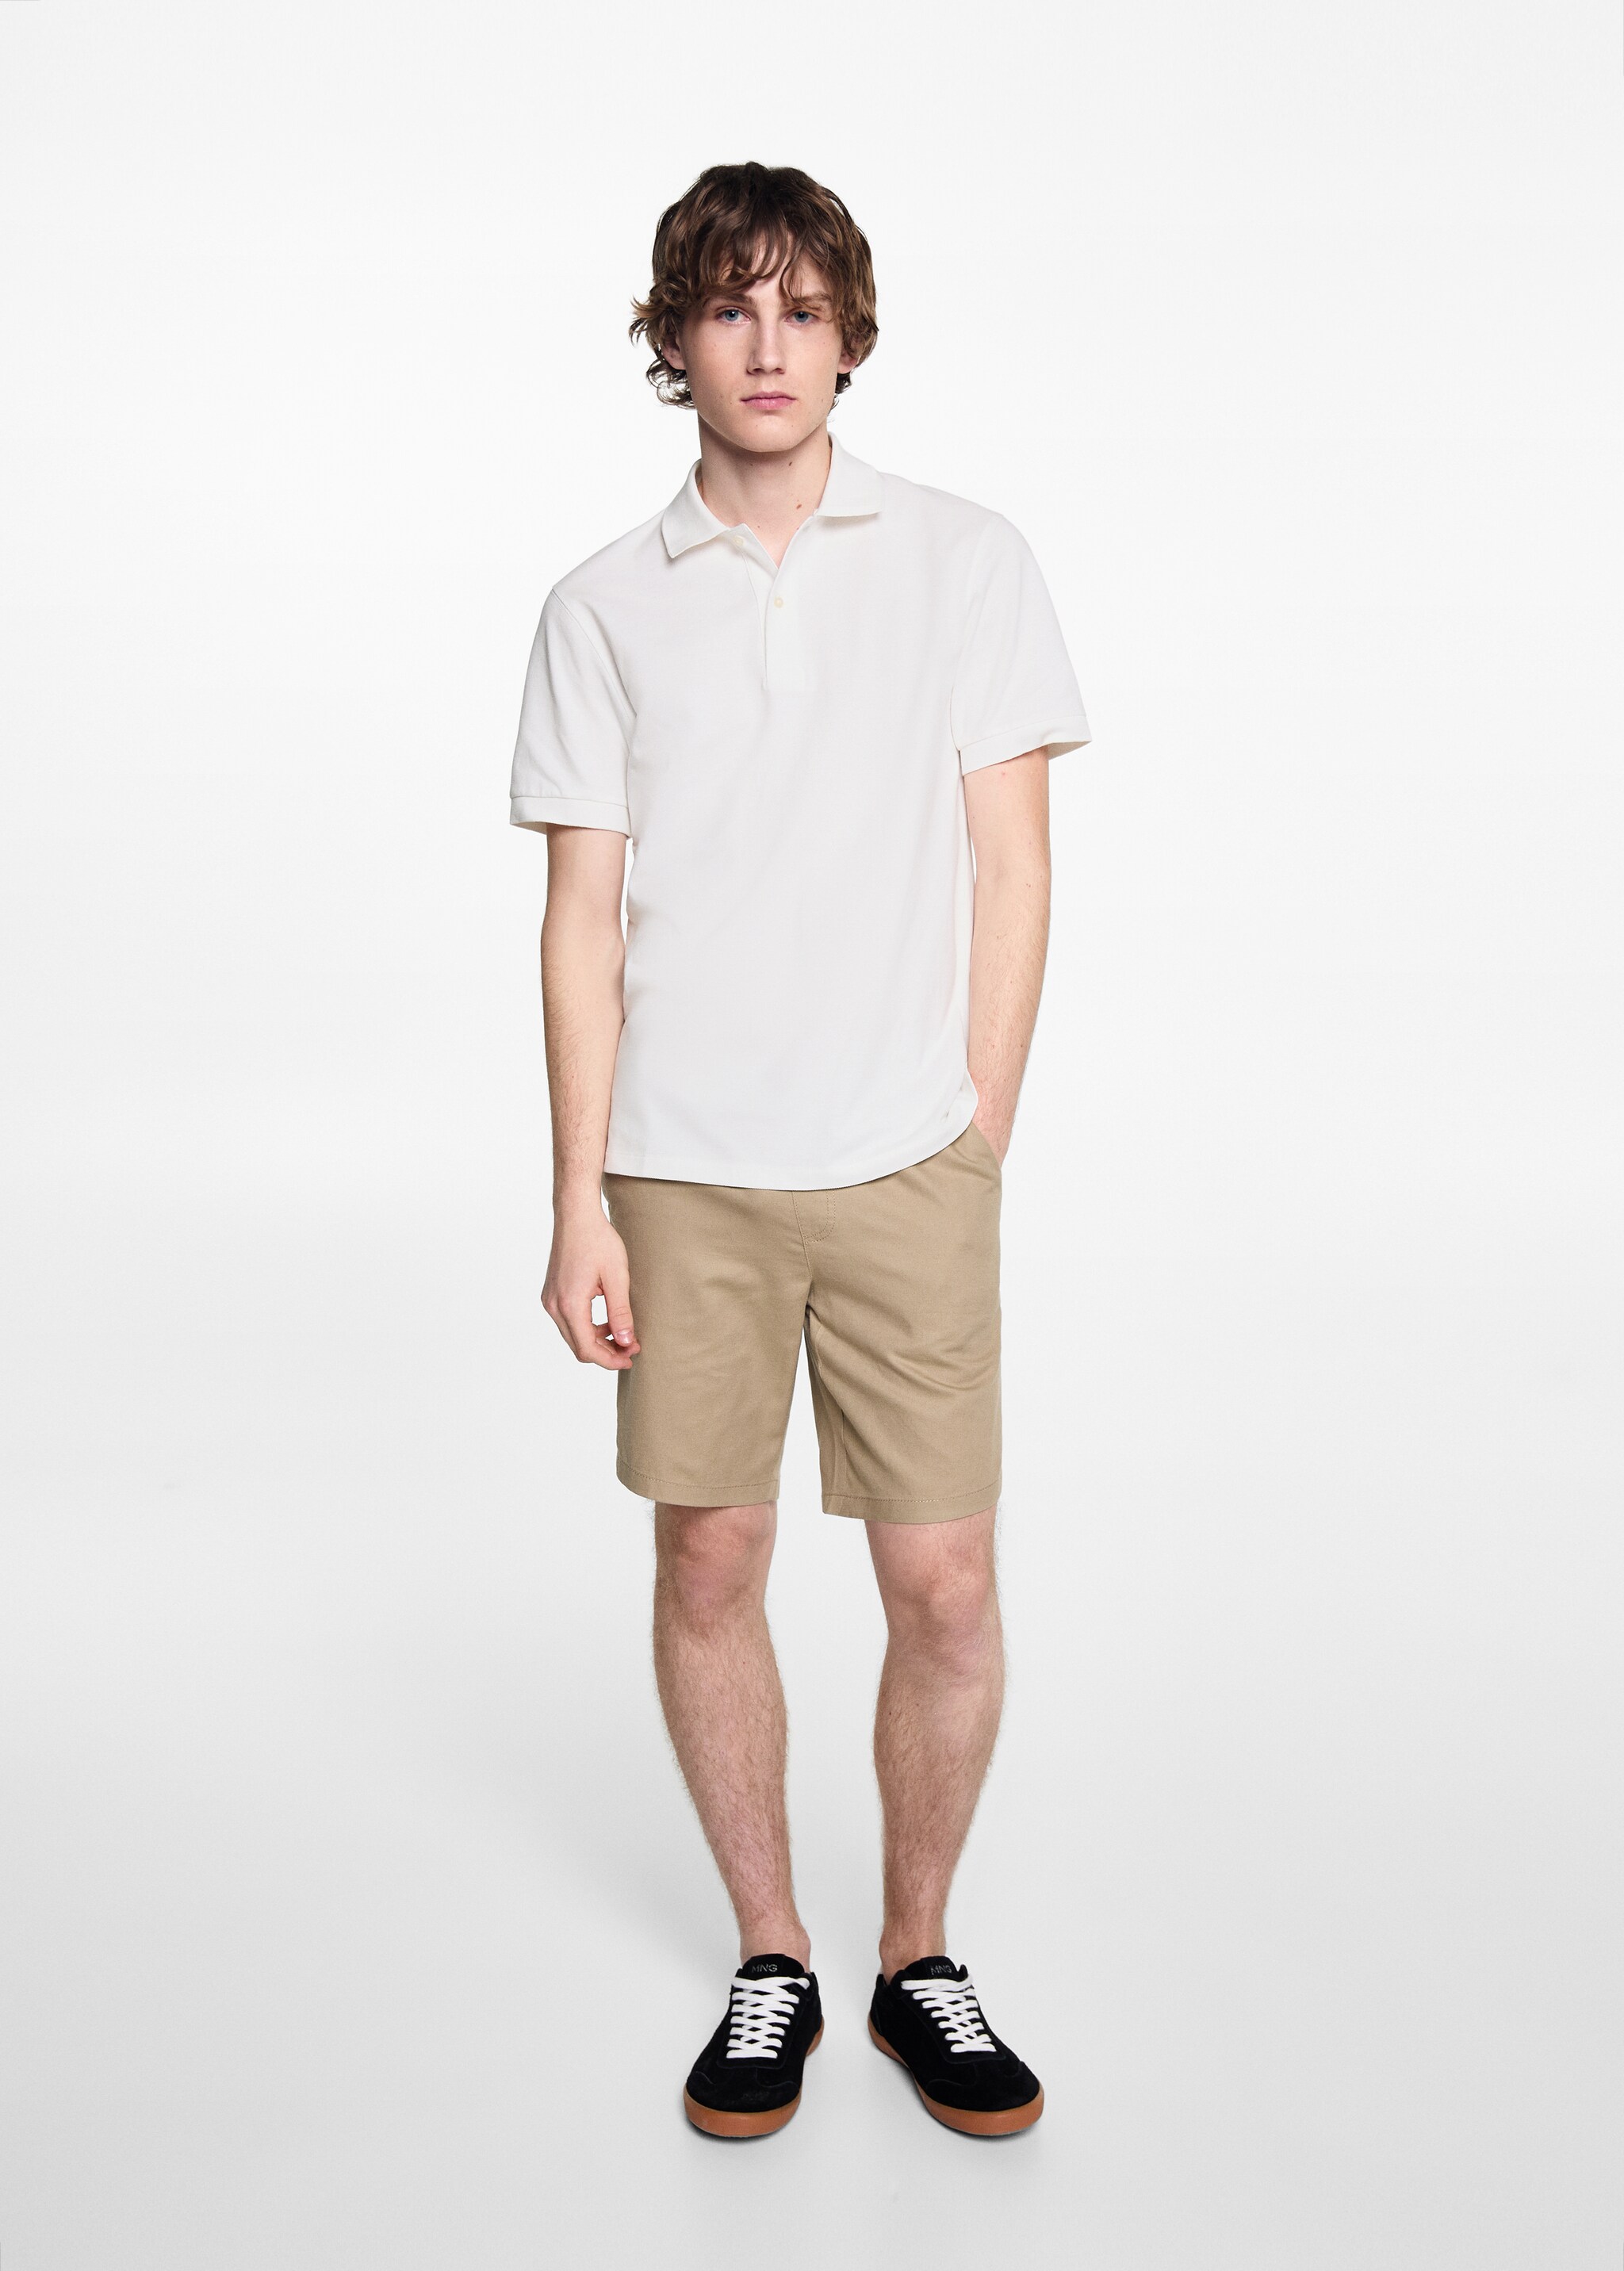 Short-sleeved cotton polo shirt - General plane